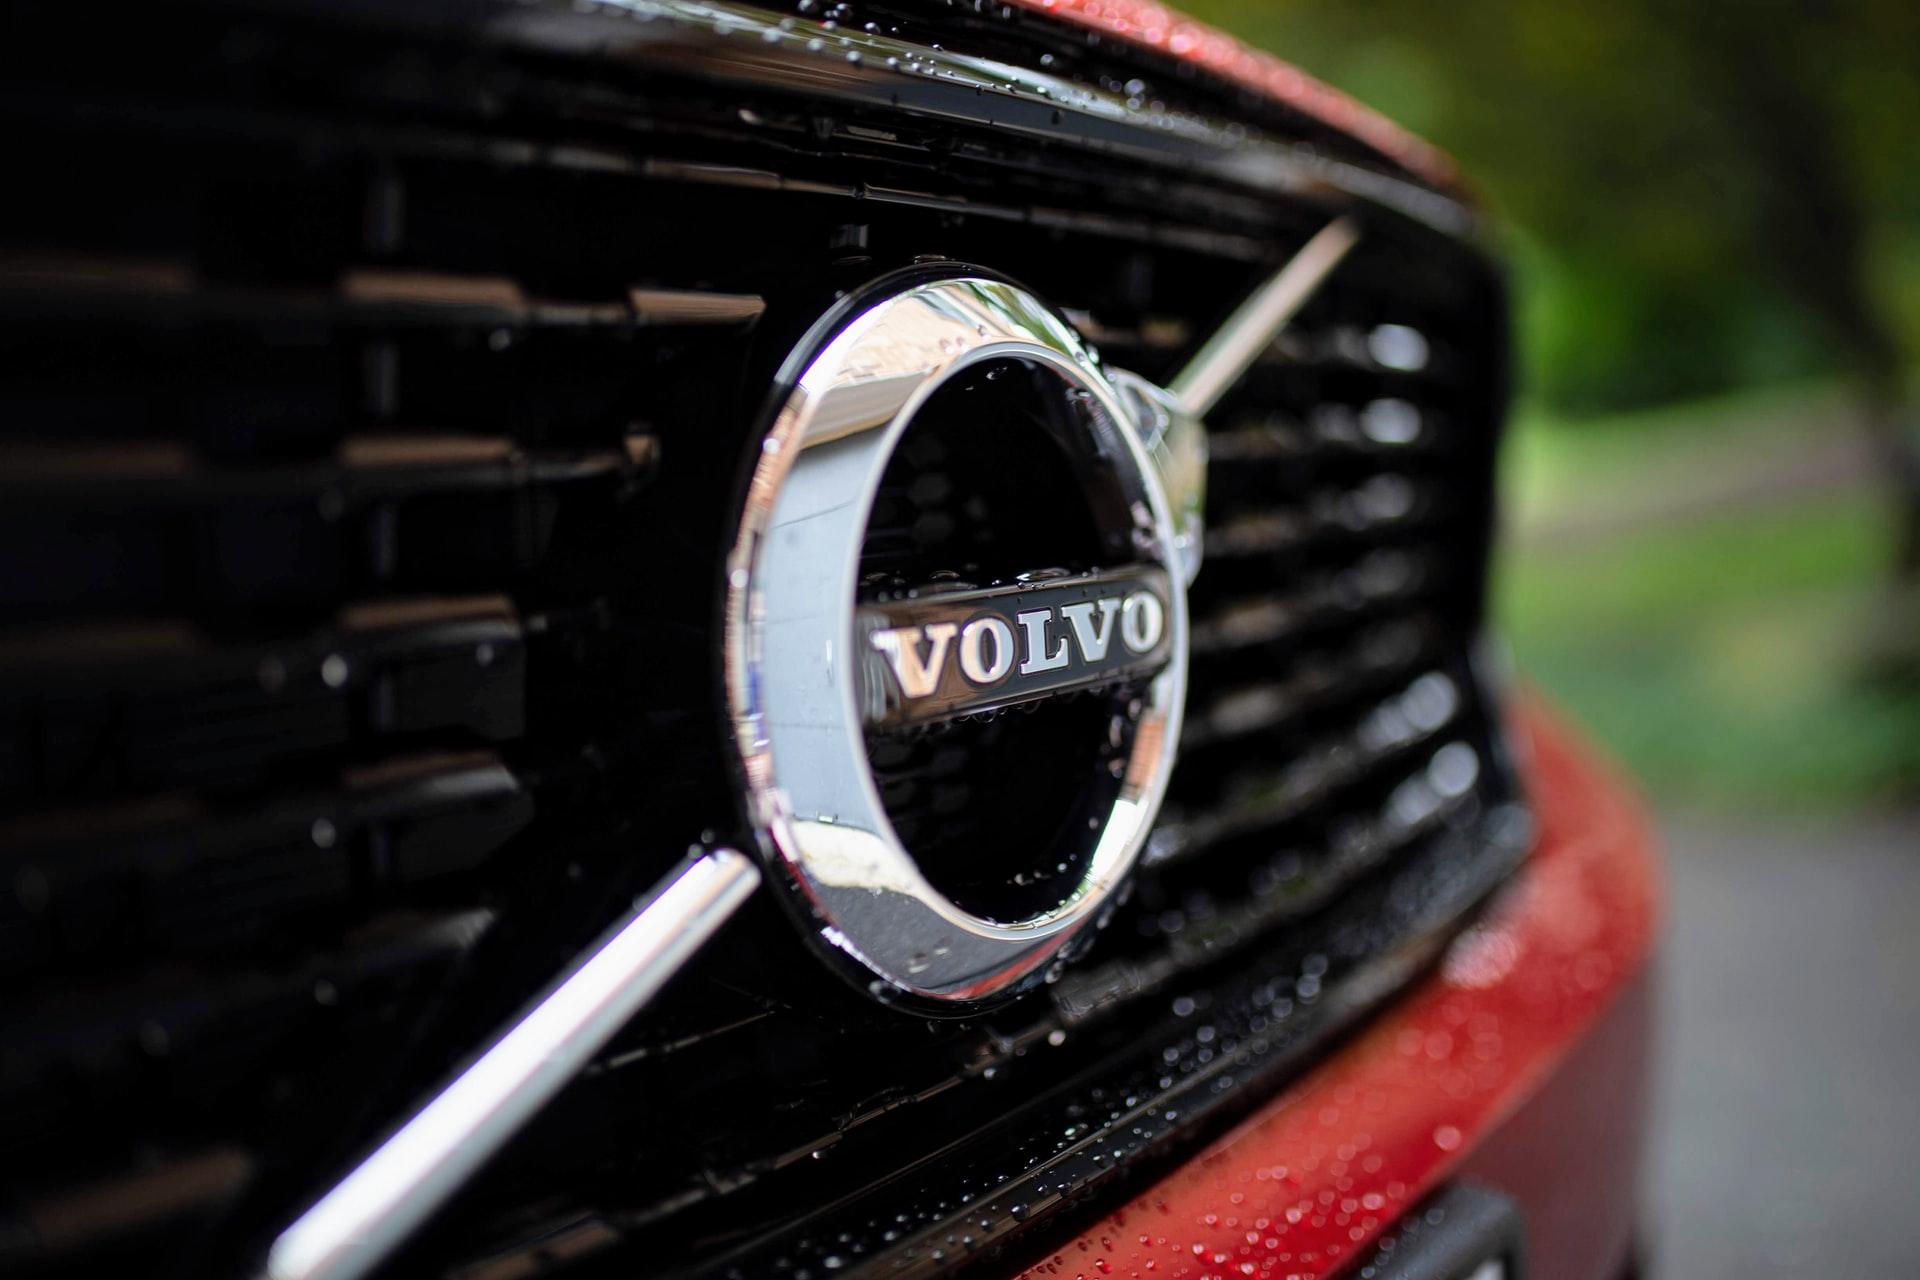 Have you wondered about the story behind Volvo’s logo?